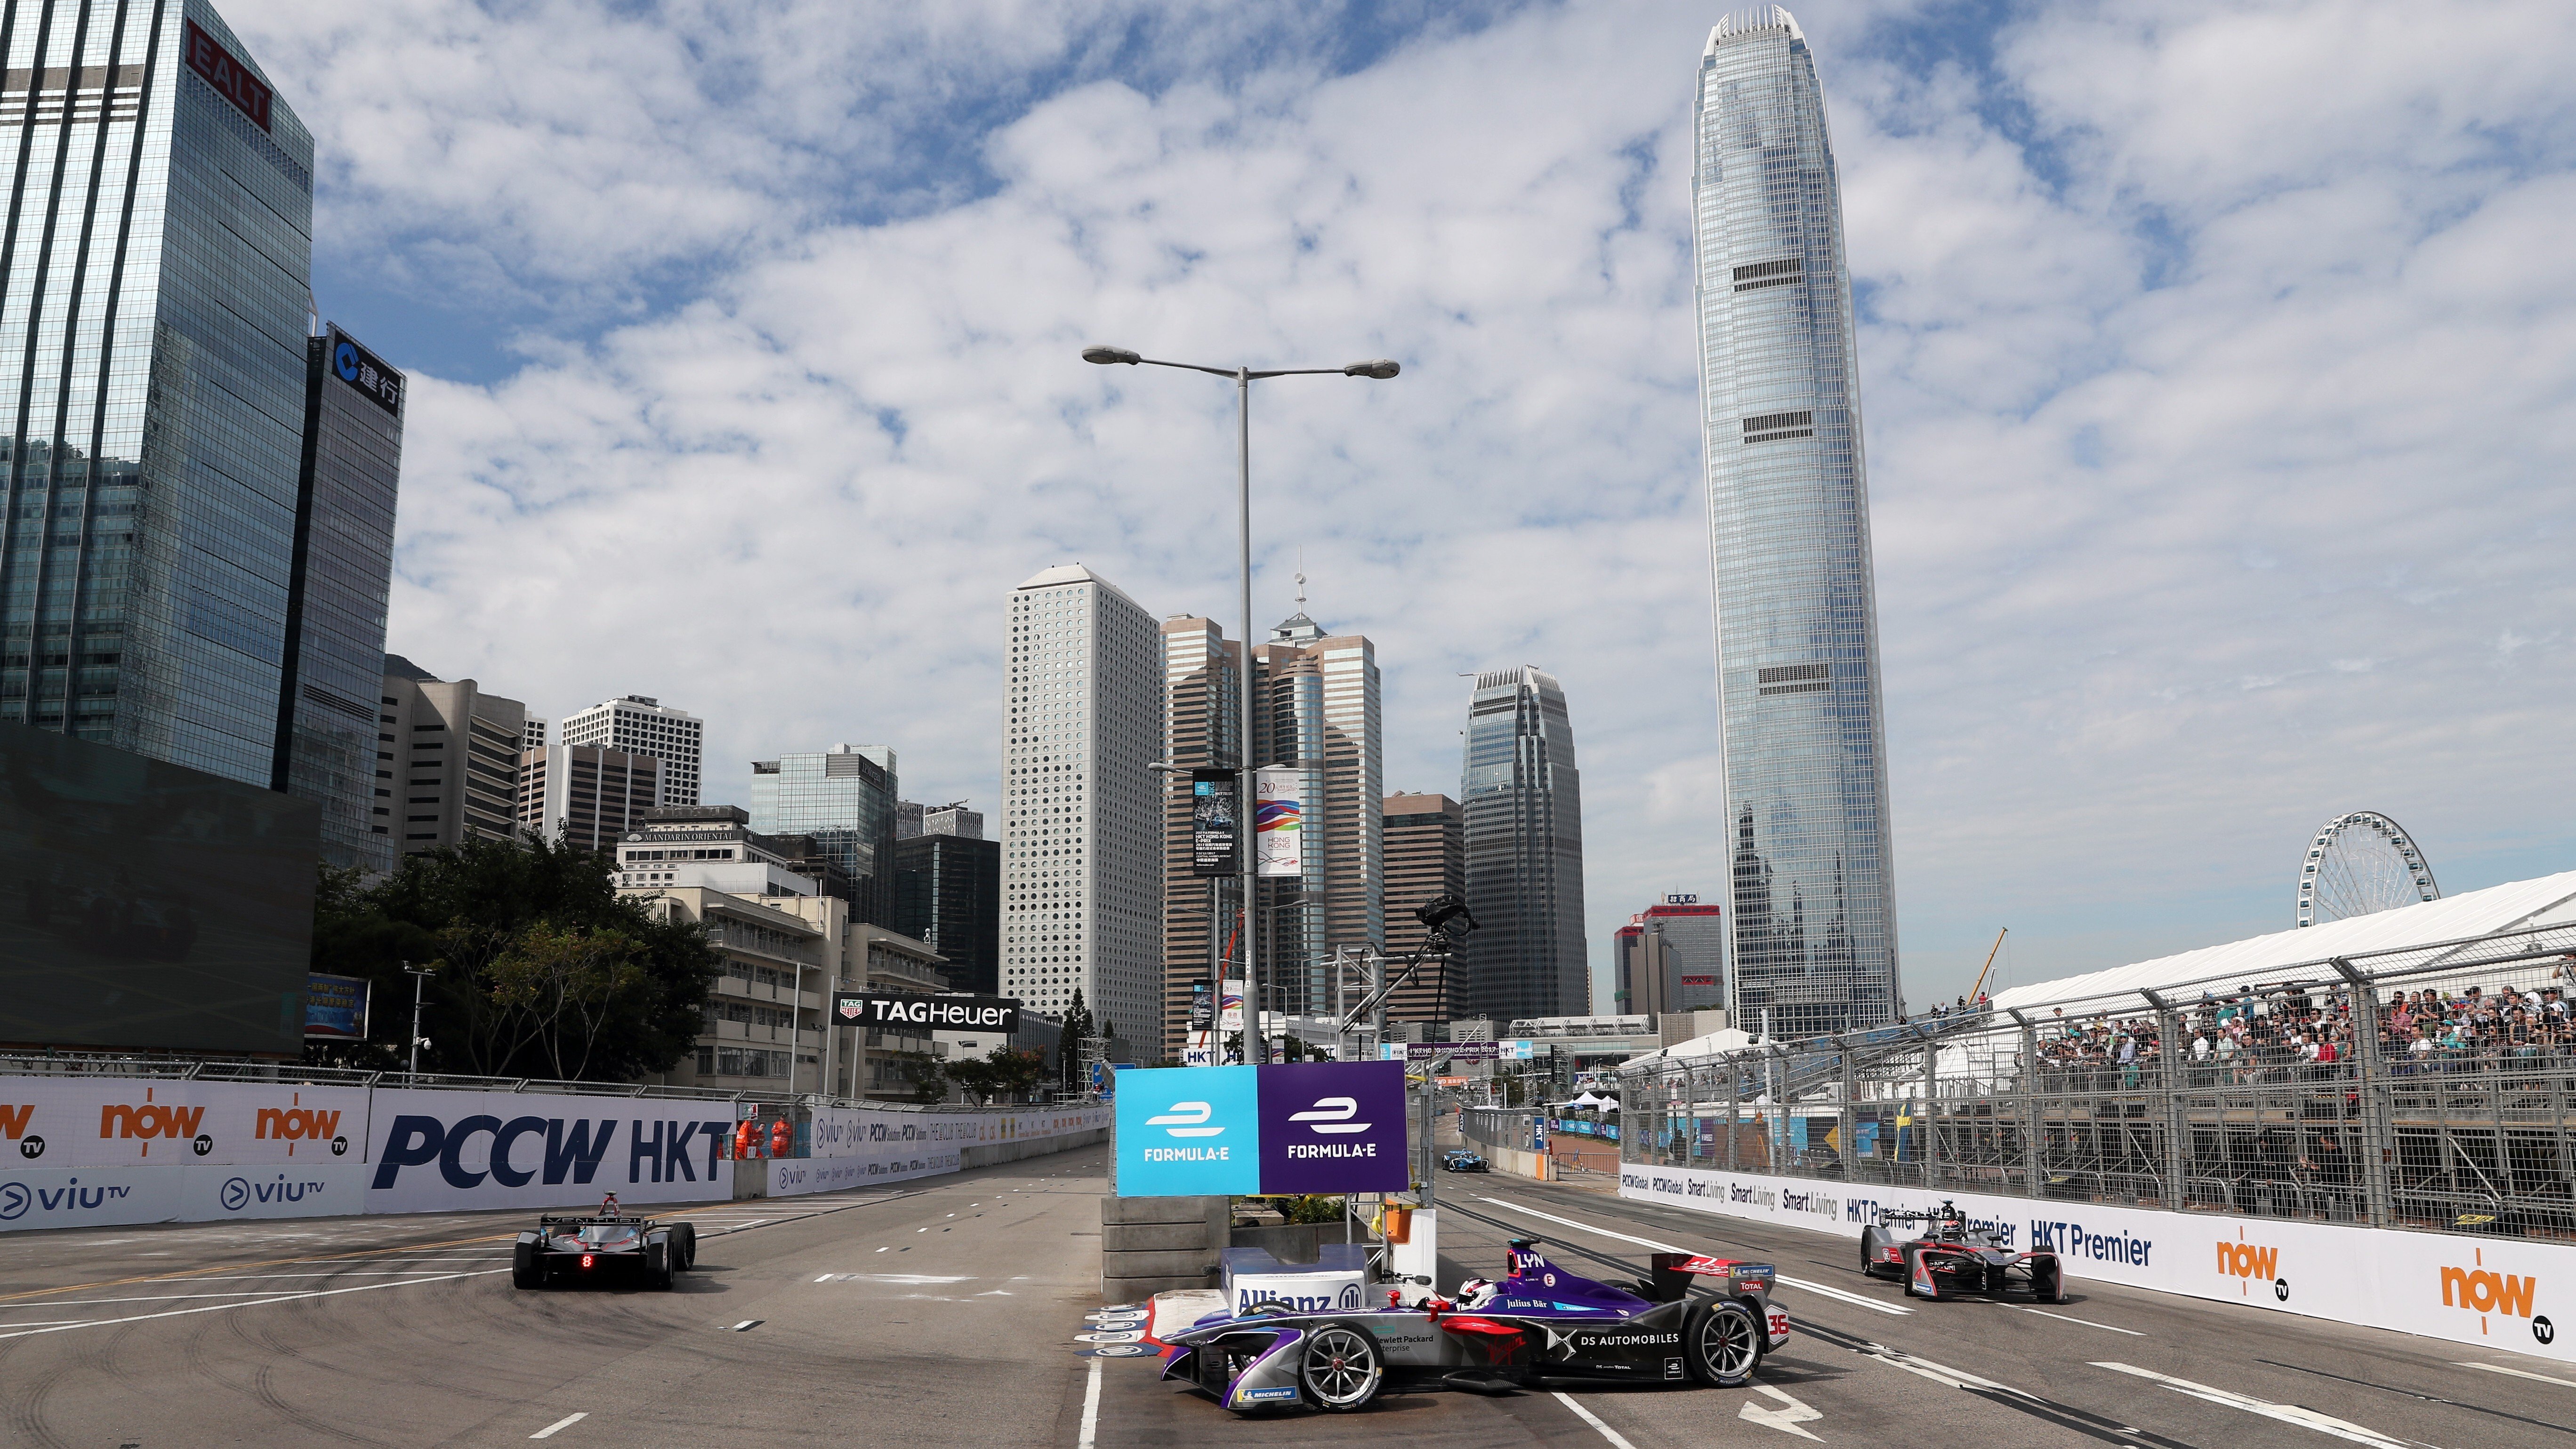 The famous Central Harbourfront circuit will be missing from the Formula E circuit for the second season in a row. Photo: K.Y. Cheng